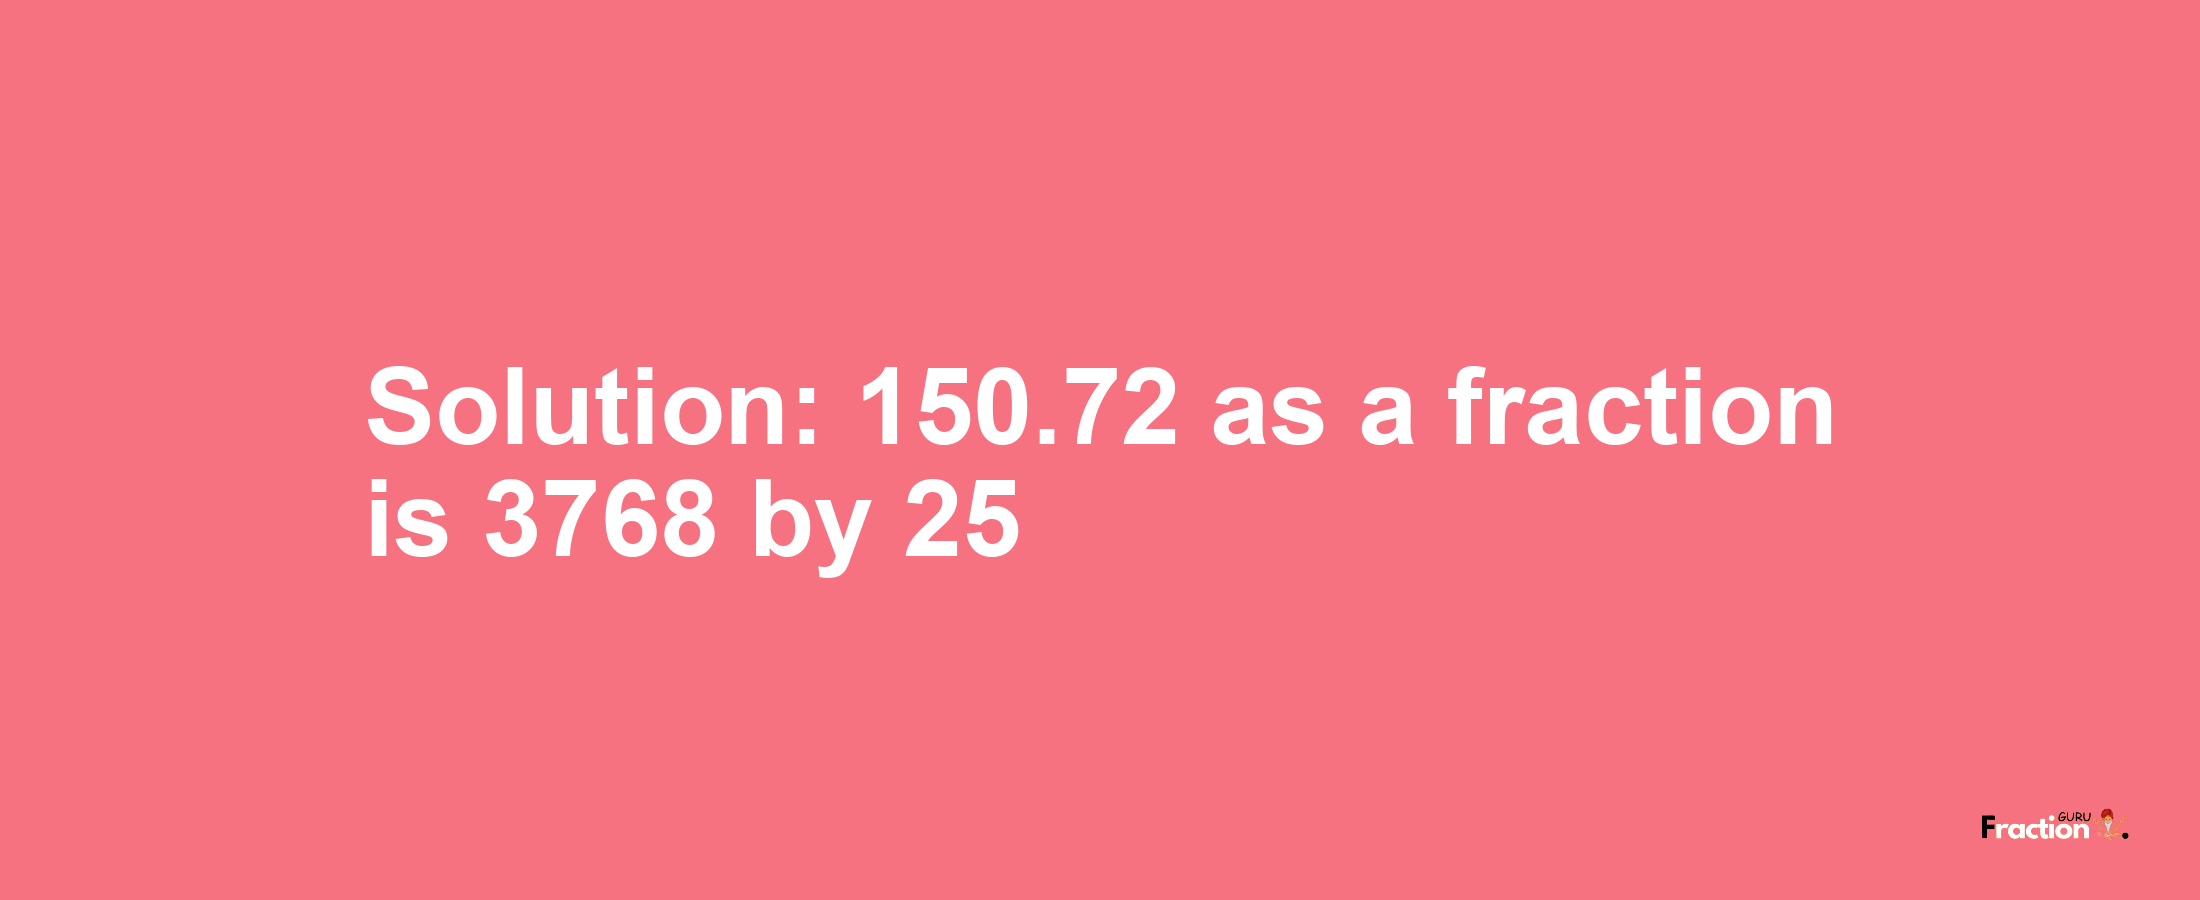 Solution:150.72 as a fraction is 3768/25